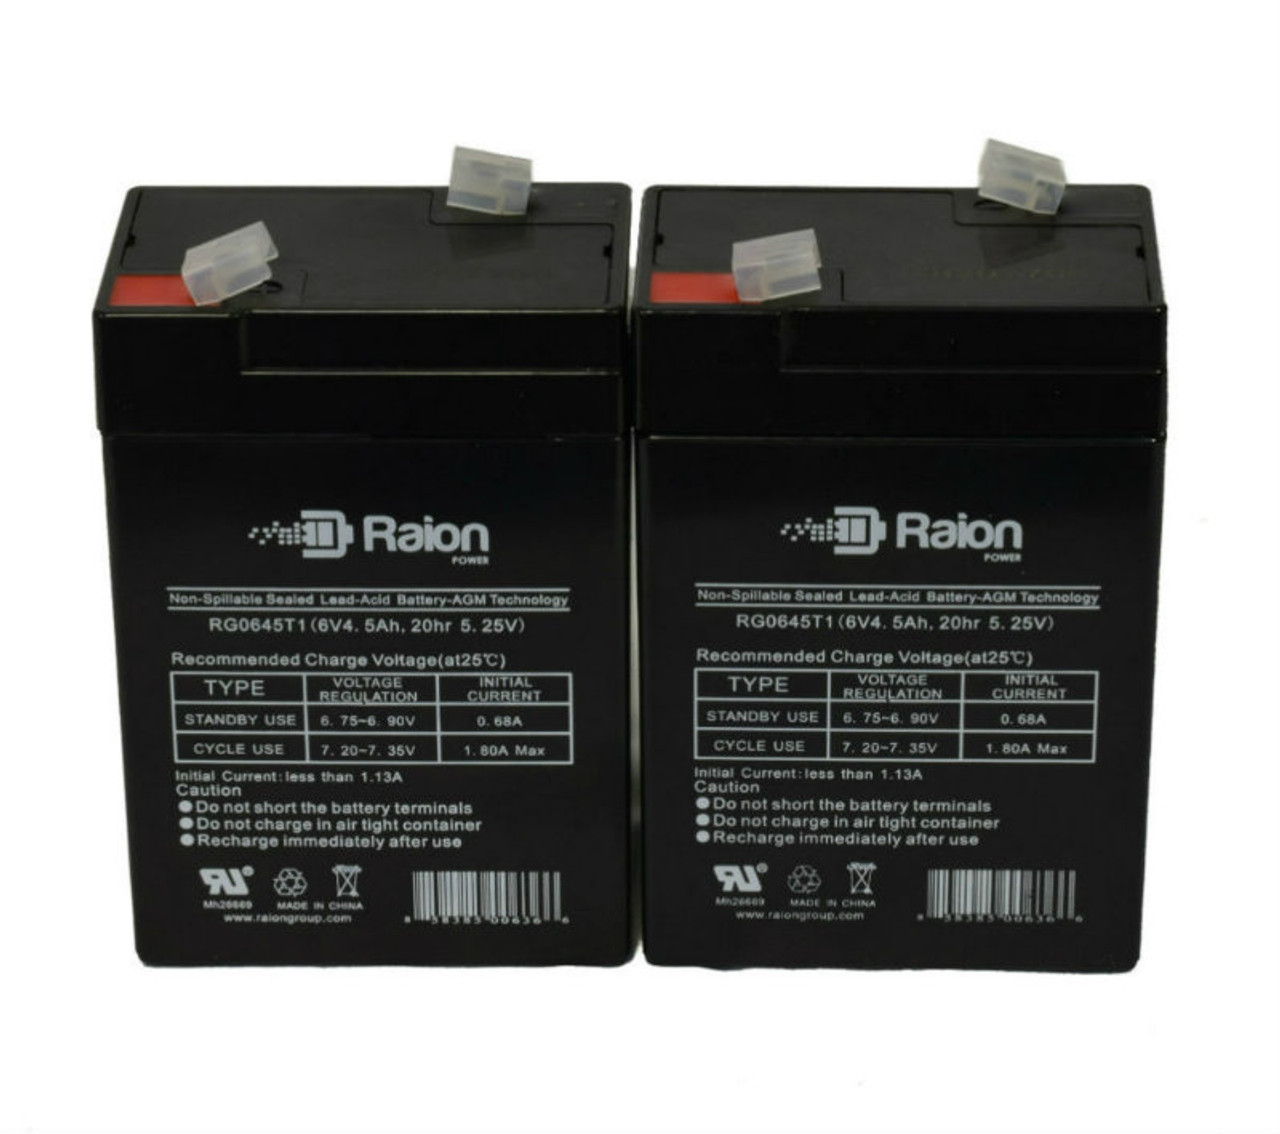 Raion Power 6V 4.5Ah Replacement Emergency Light Battery for IBT BT4-6 - 2 Pack